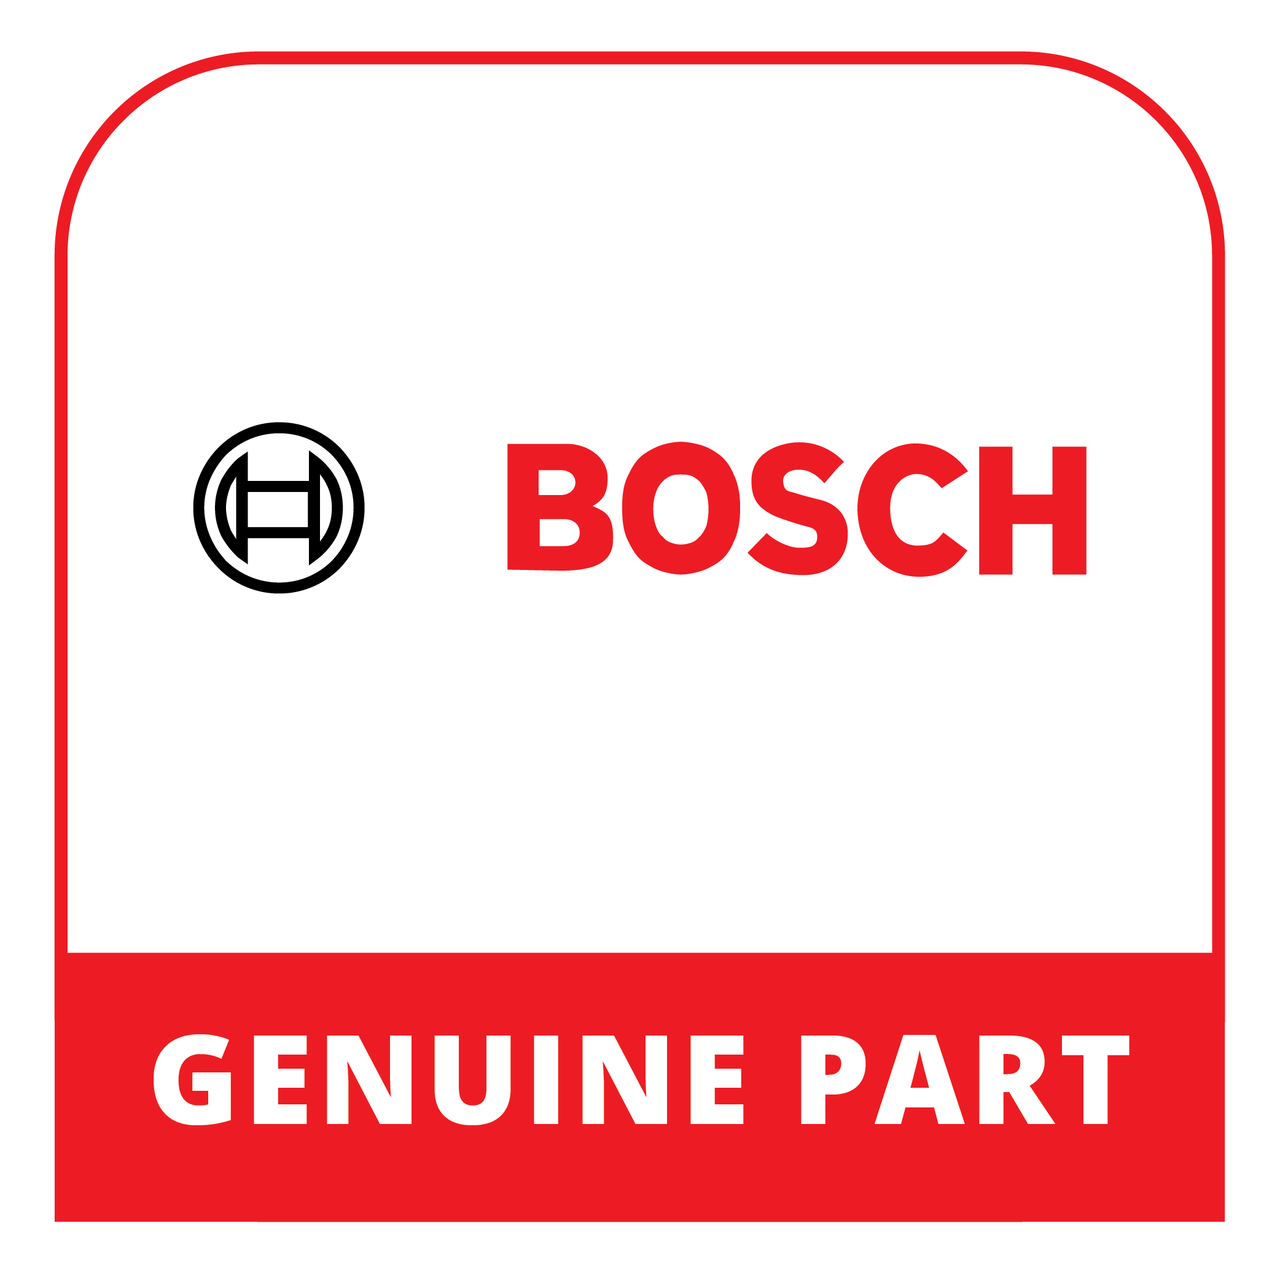 Bosch (Thermador) 11056989 - Operating Module - Genuine Bosch (Thermador) Part